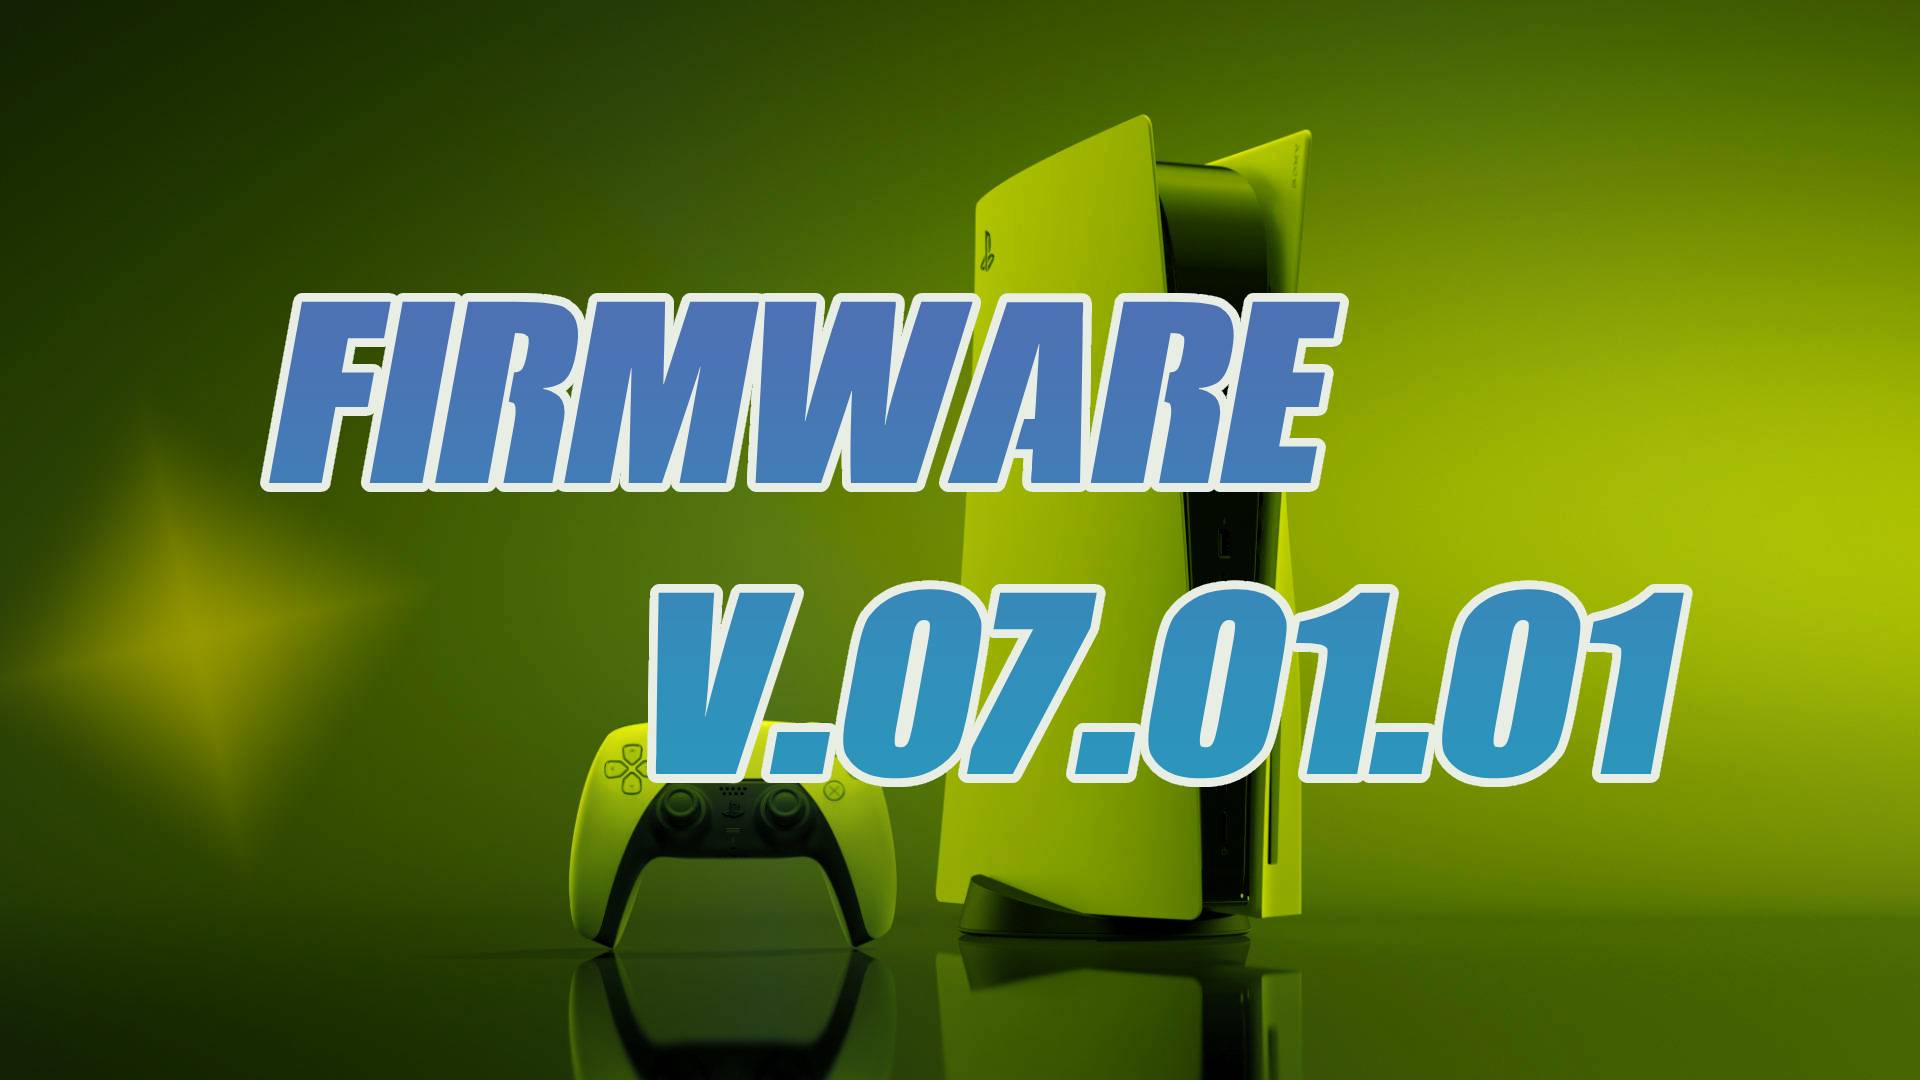 PS5 Releases Firmware 07.01.01 Fixes Annoying Problem